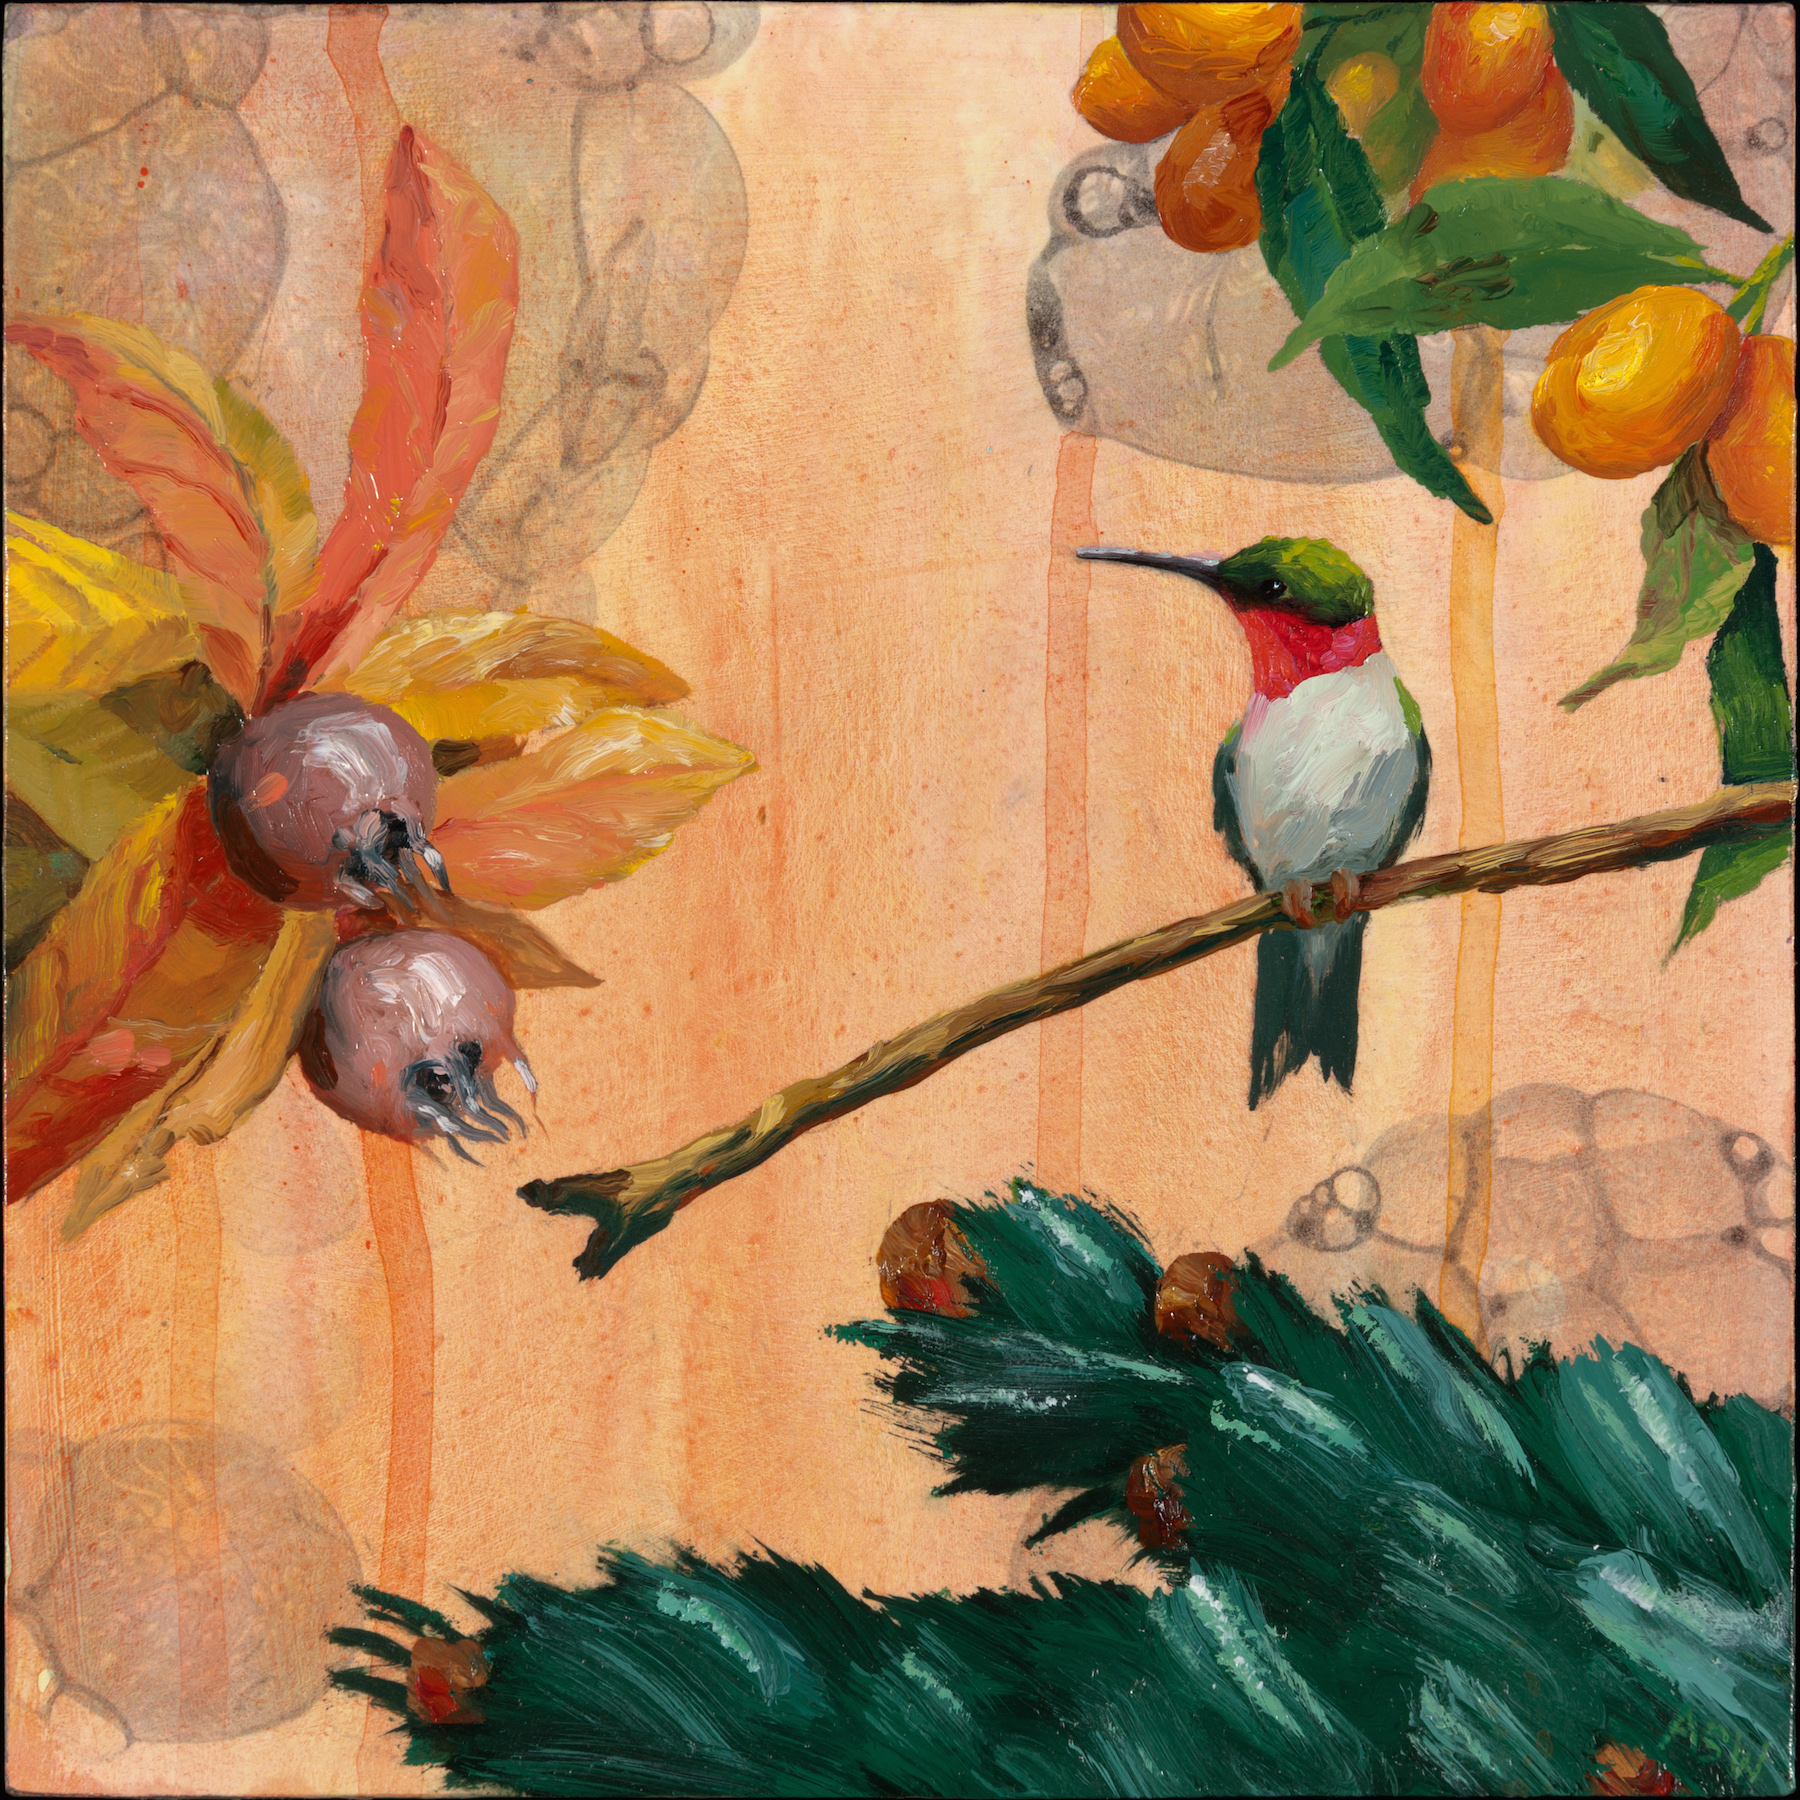    Anne Sargent Walker,   Hummingbird with Fruit,   Oil, acrylic on wood panel, 8" x 8"  